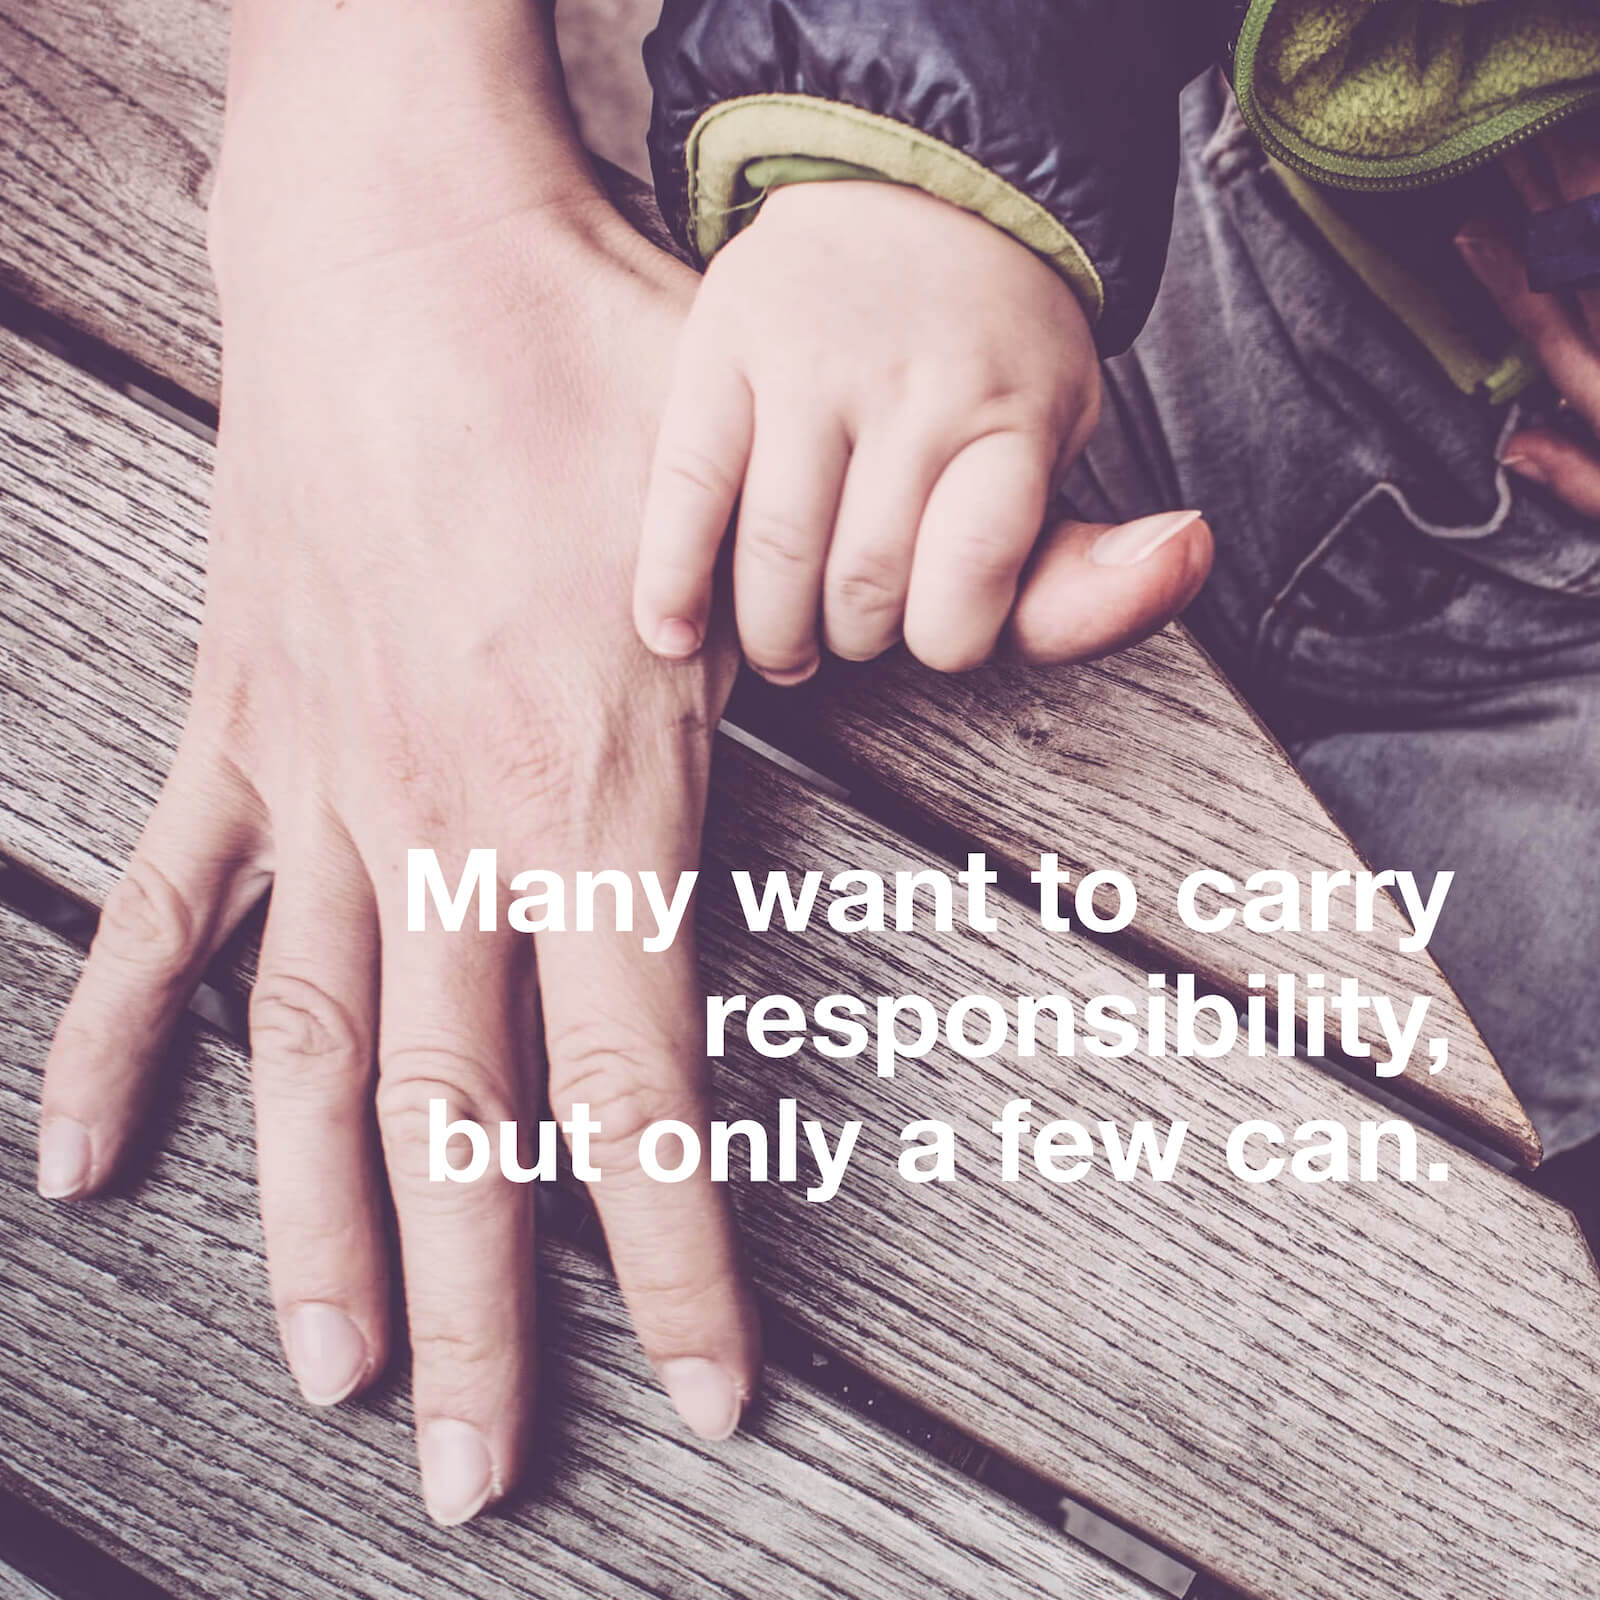 Many want to carry responsibility, but only a few can.